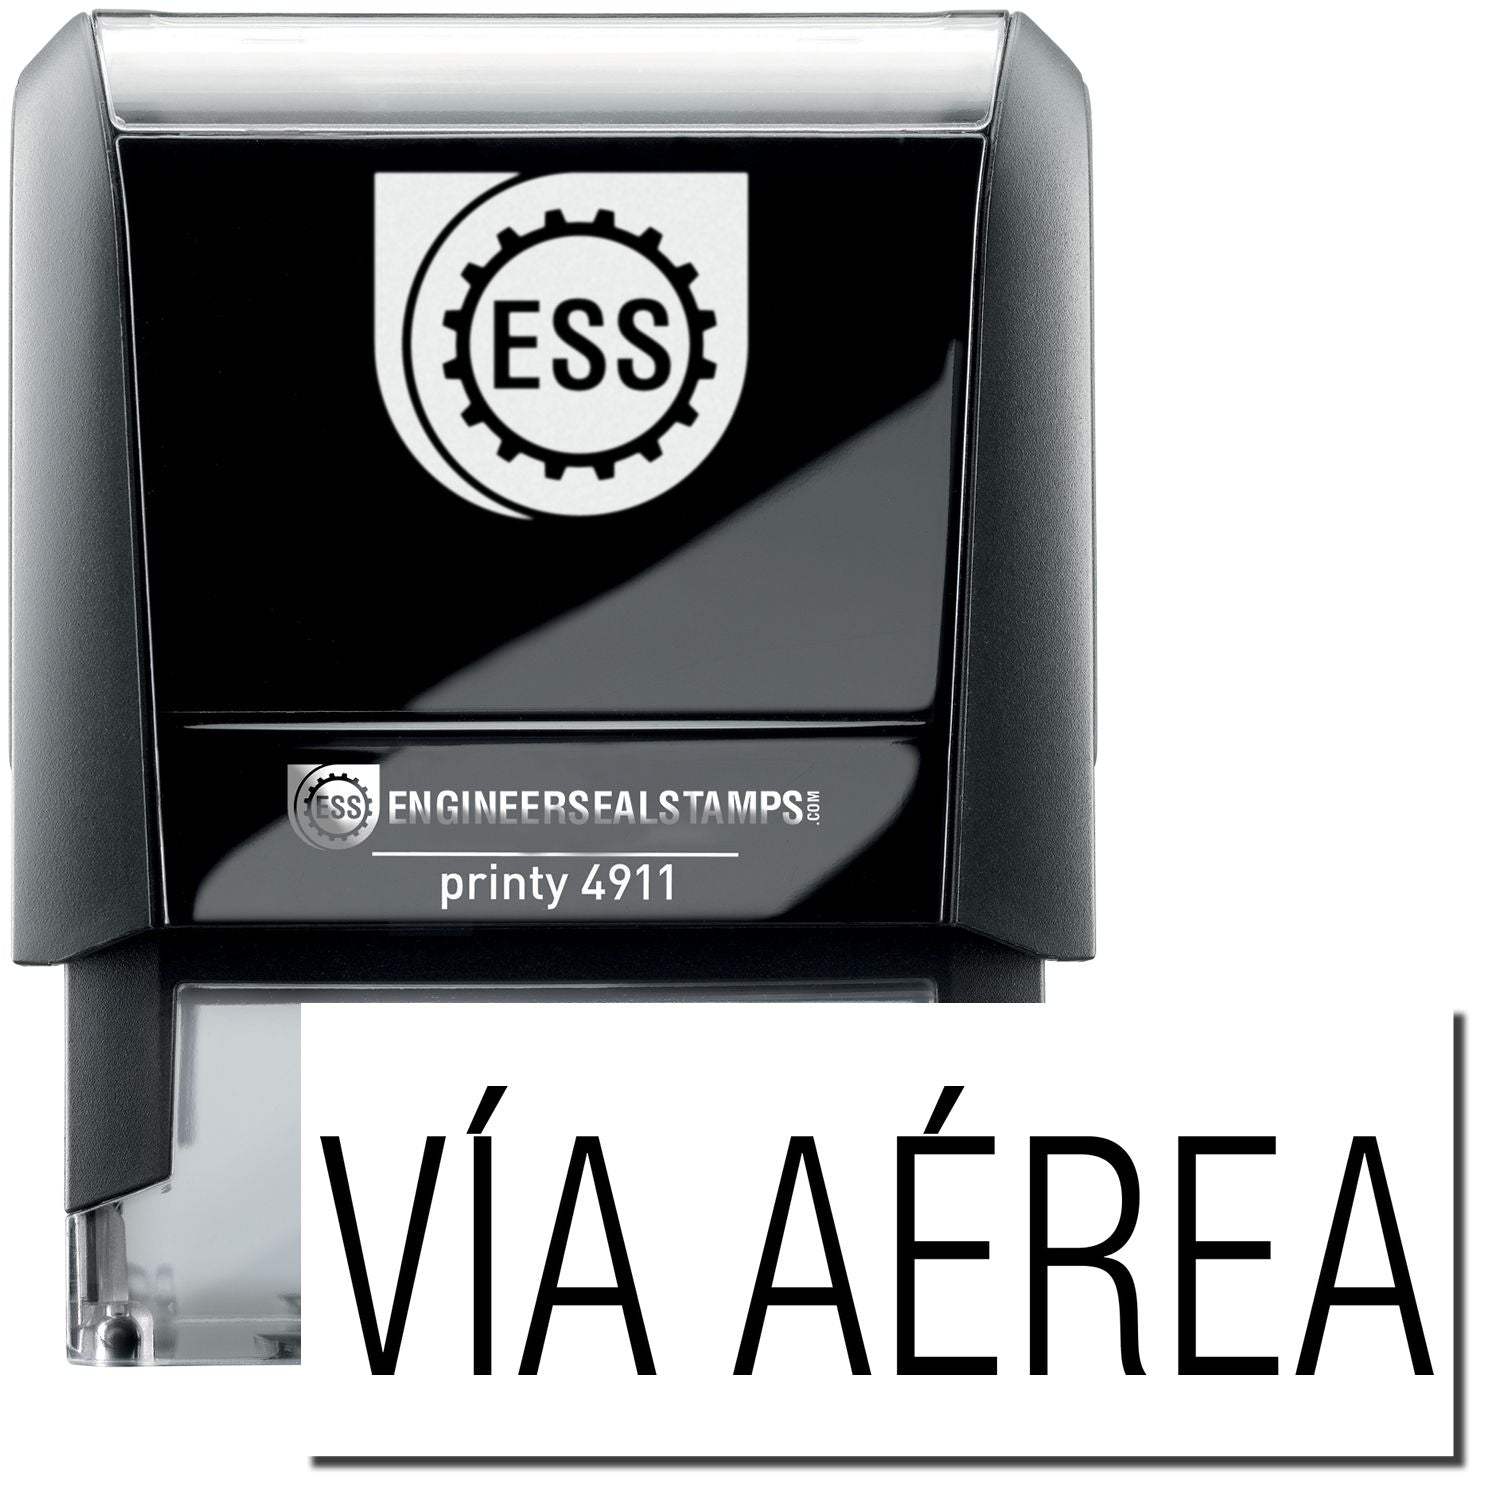 A self-inking stamp with a stamped image showing how the text "VIA AEREA" is displayed after stamping.